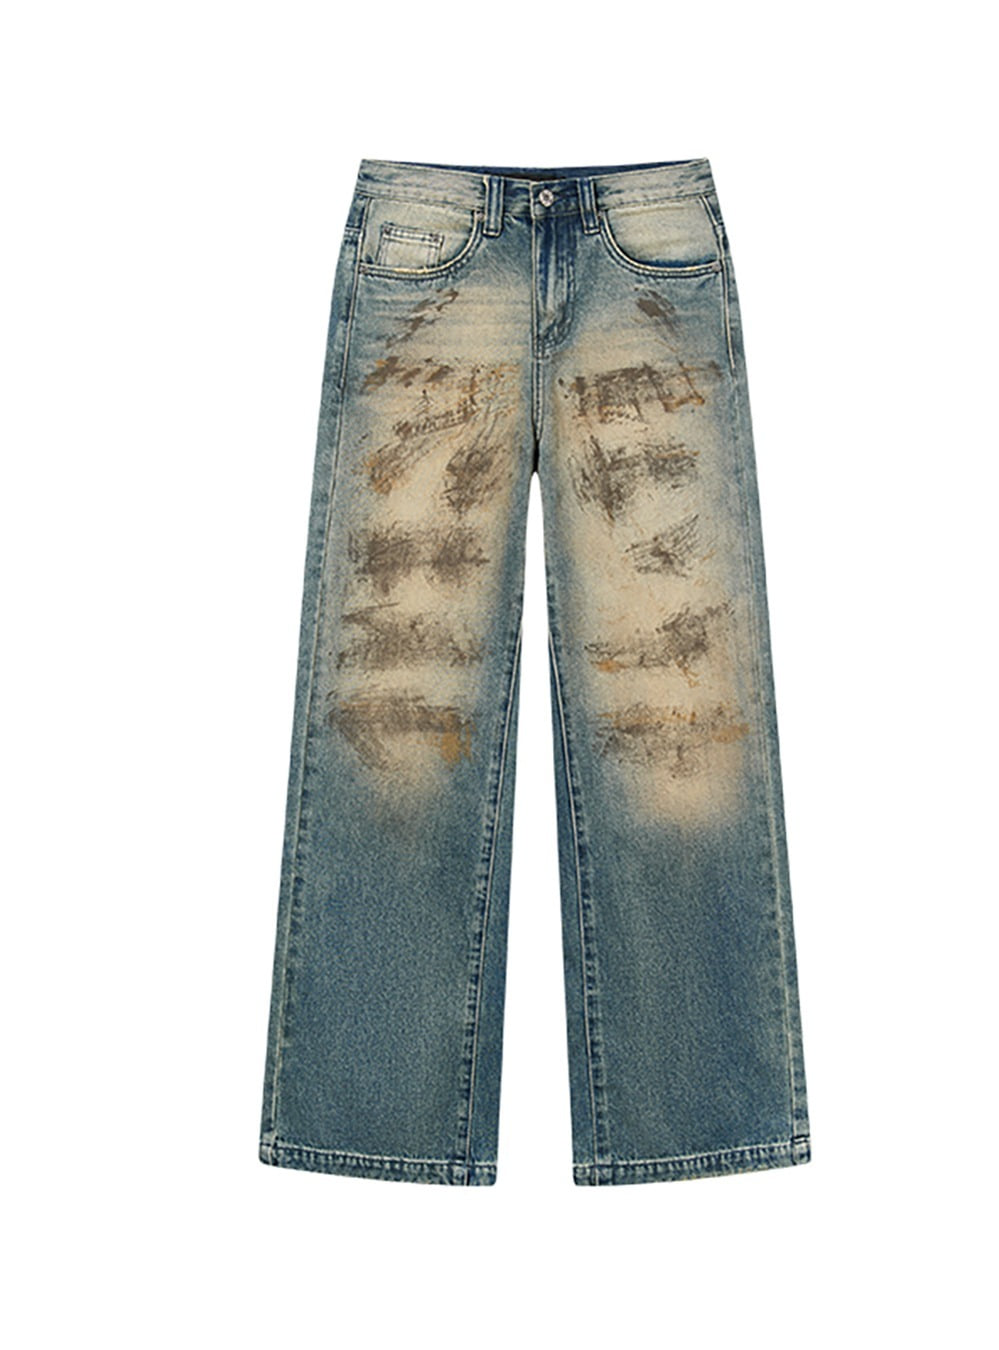 [BLIND NO PLAN] Distressed Mud Color Straight Jeans